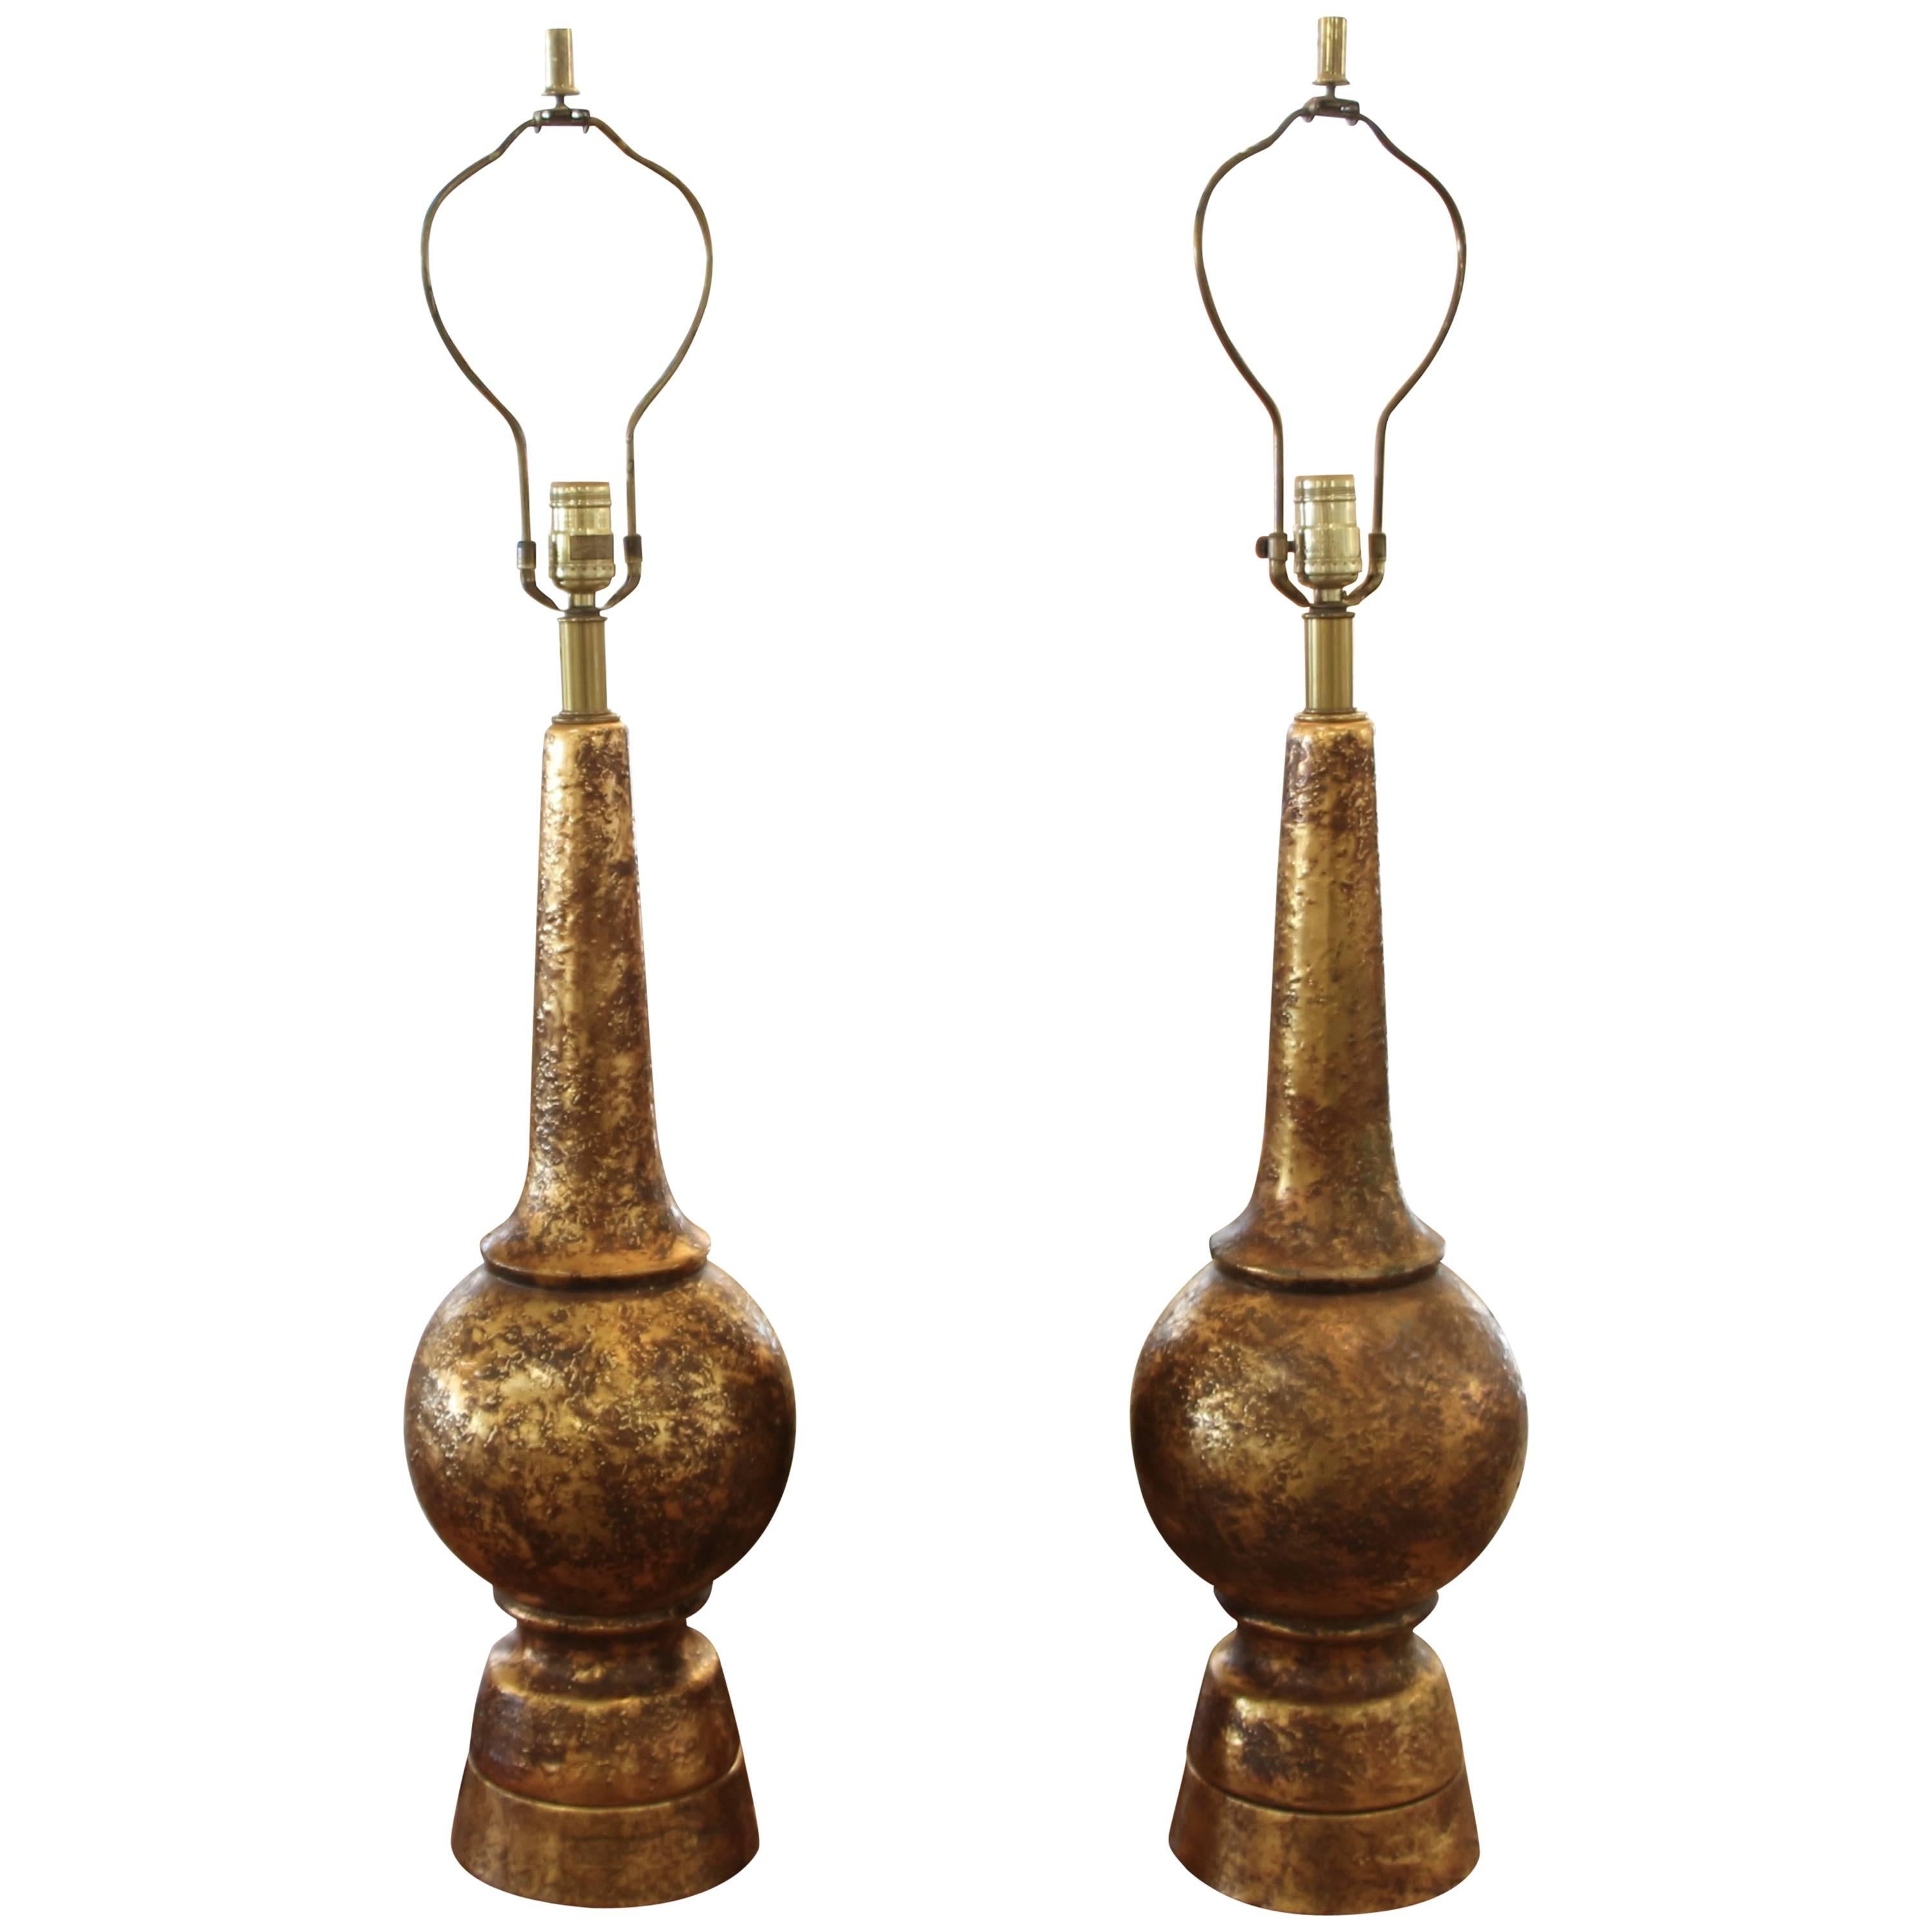 A nice pair of Nardini lamps in patinated brass iron base and brass bodies. these lamps are in working order. They stand quite tall at 38 inches to the finial top and 29 inches to top of lamp socket. They are 8 inches in diameter. The shades